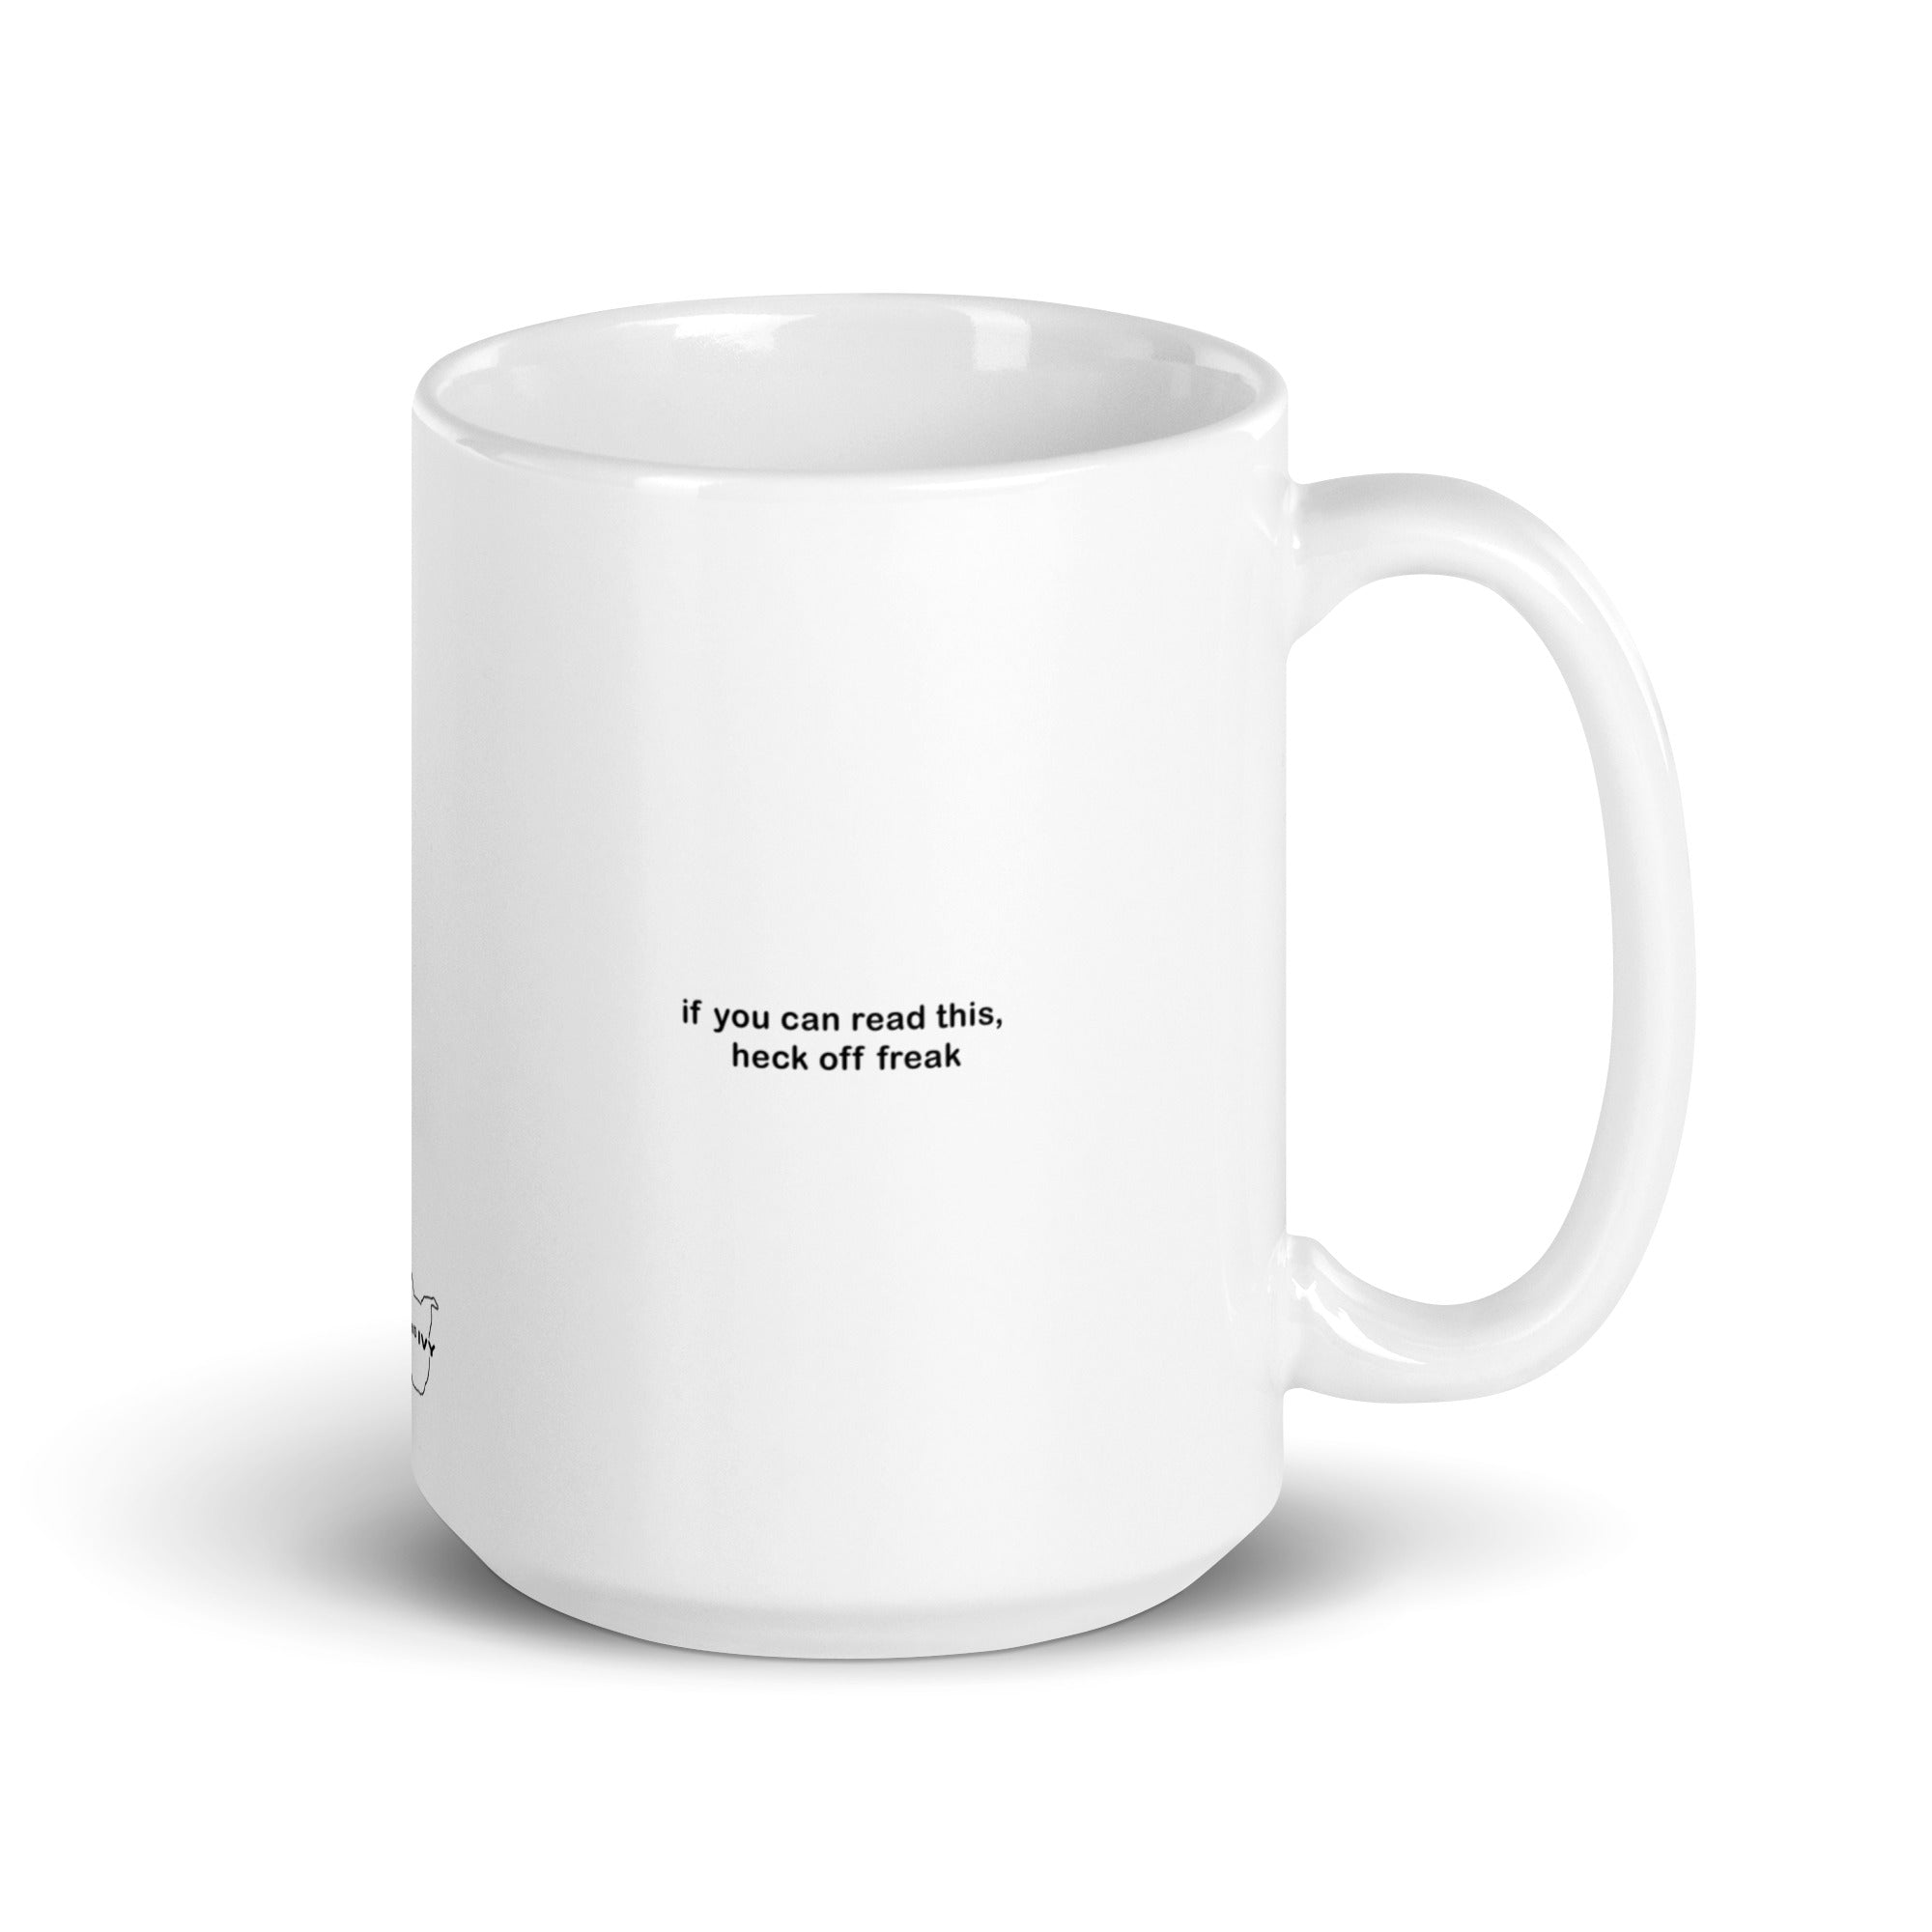 "If You Can Read This, Heck Off Freak" White glossy mug